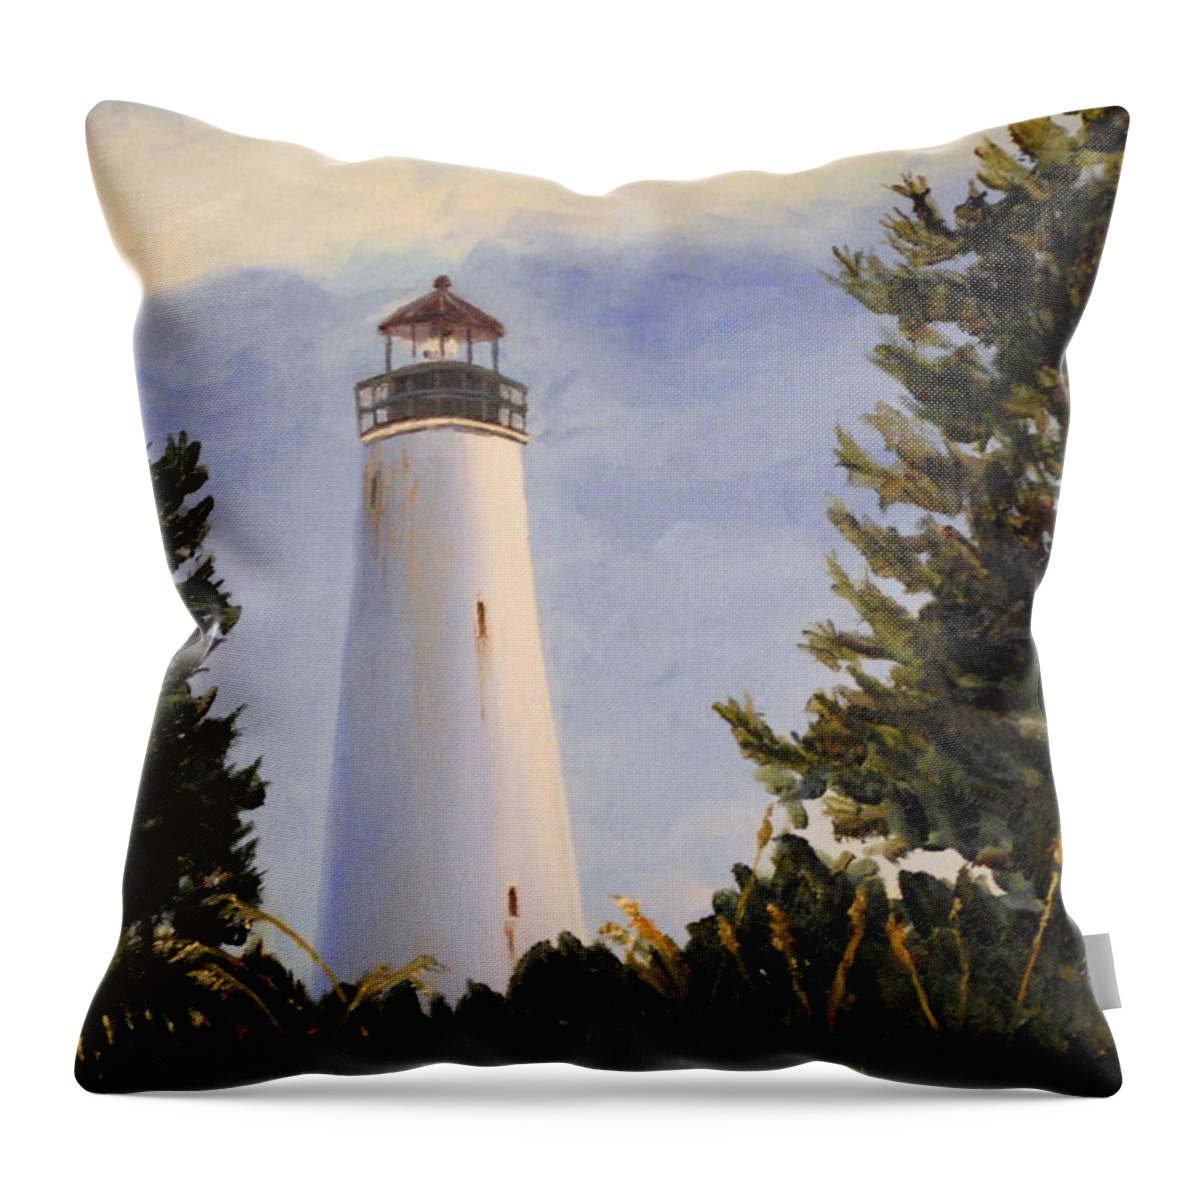 Georgetown Lighthouse Throw Pillow featuring the painting Georgetown Lighthouse Sc by Phil Burton